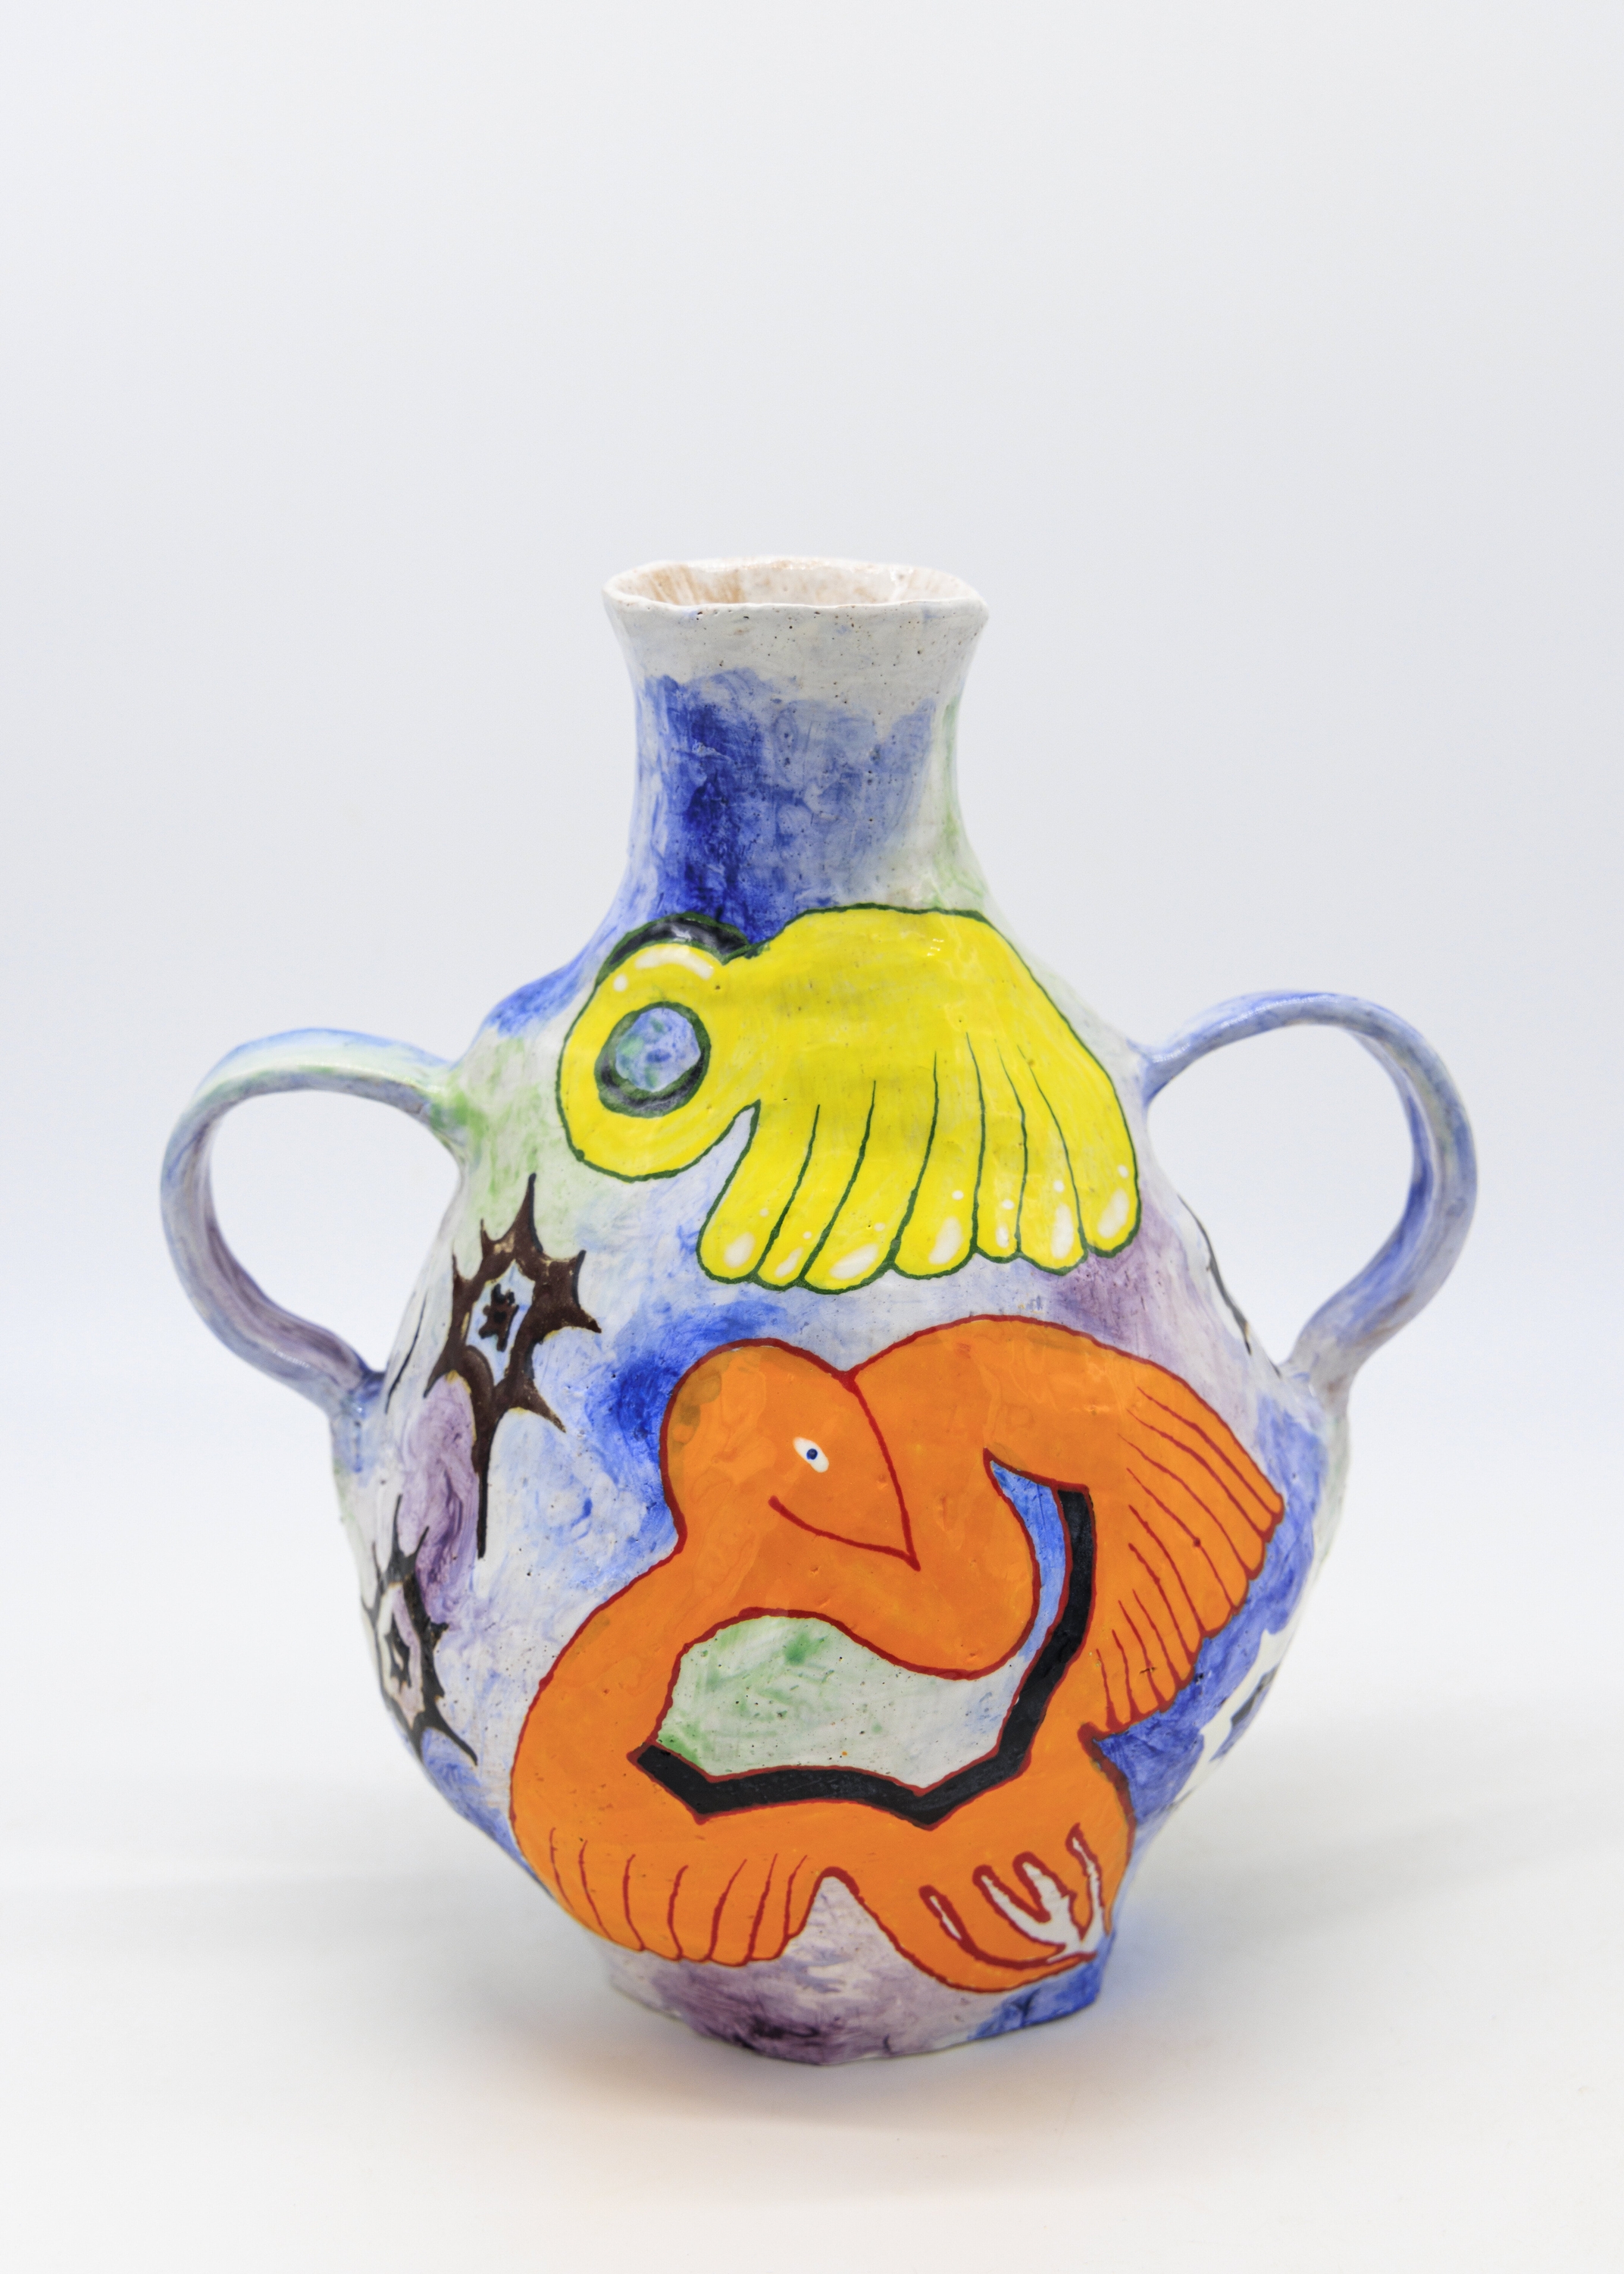 ceramic vase with a hollow orange bird and yellow amorphous shape on a blue background.